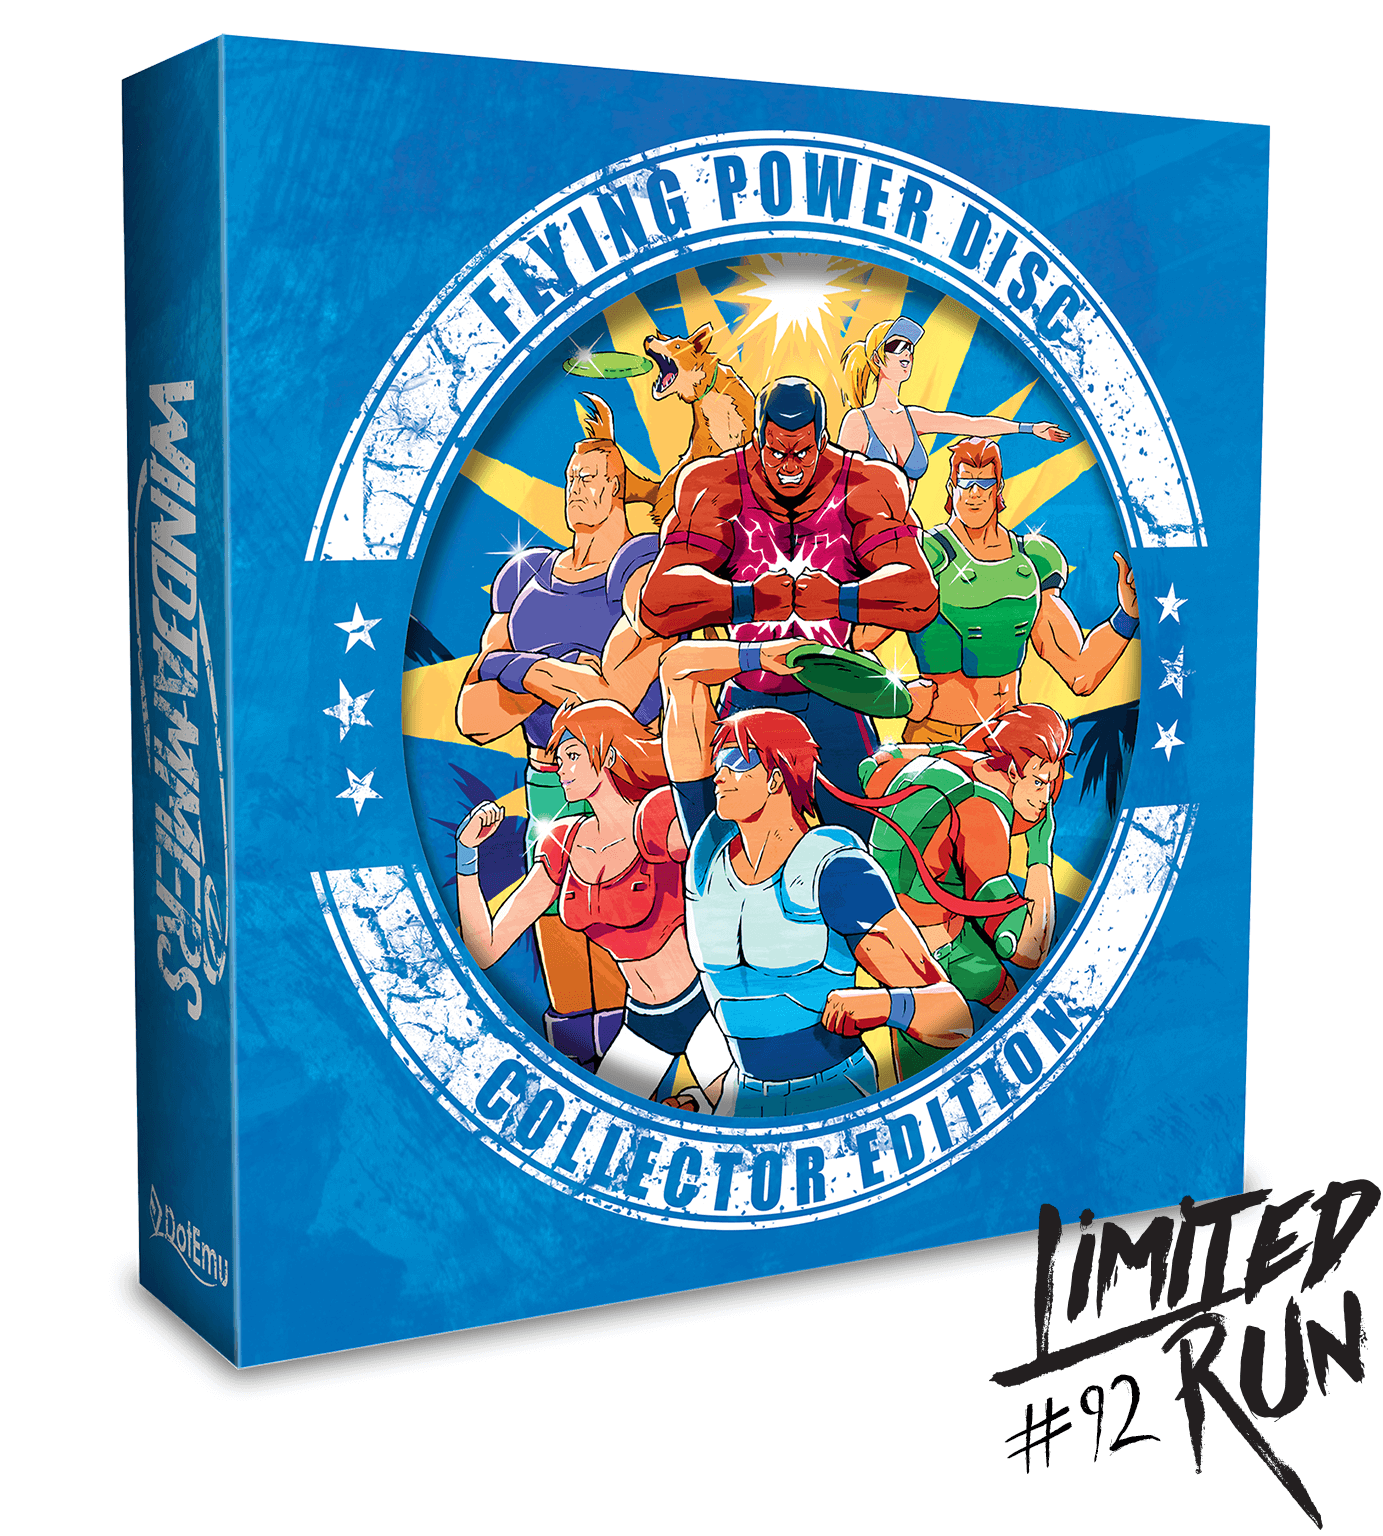 J2Games.com | Limited Run Games #92: Windjammers Flying Power Disc Collectors Edition (Playstation 4) (Brand New).